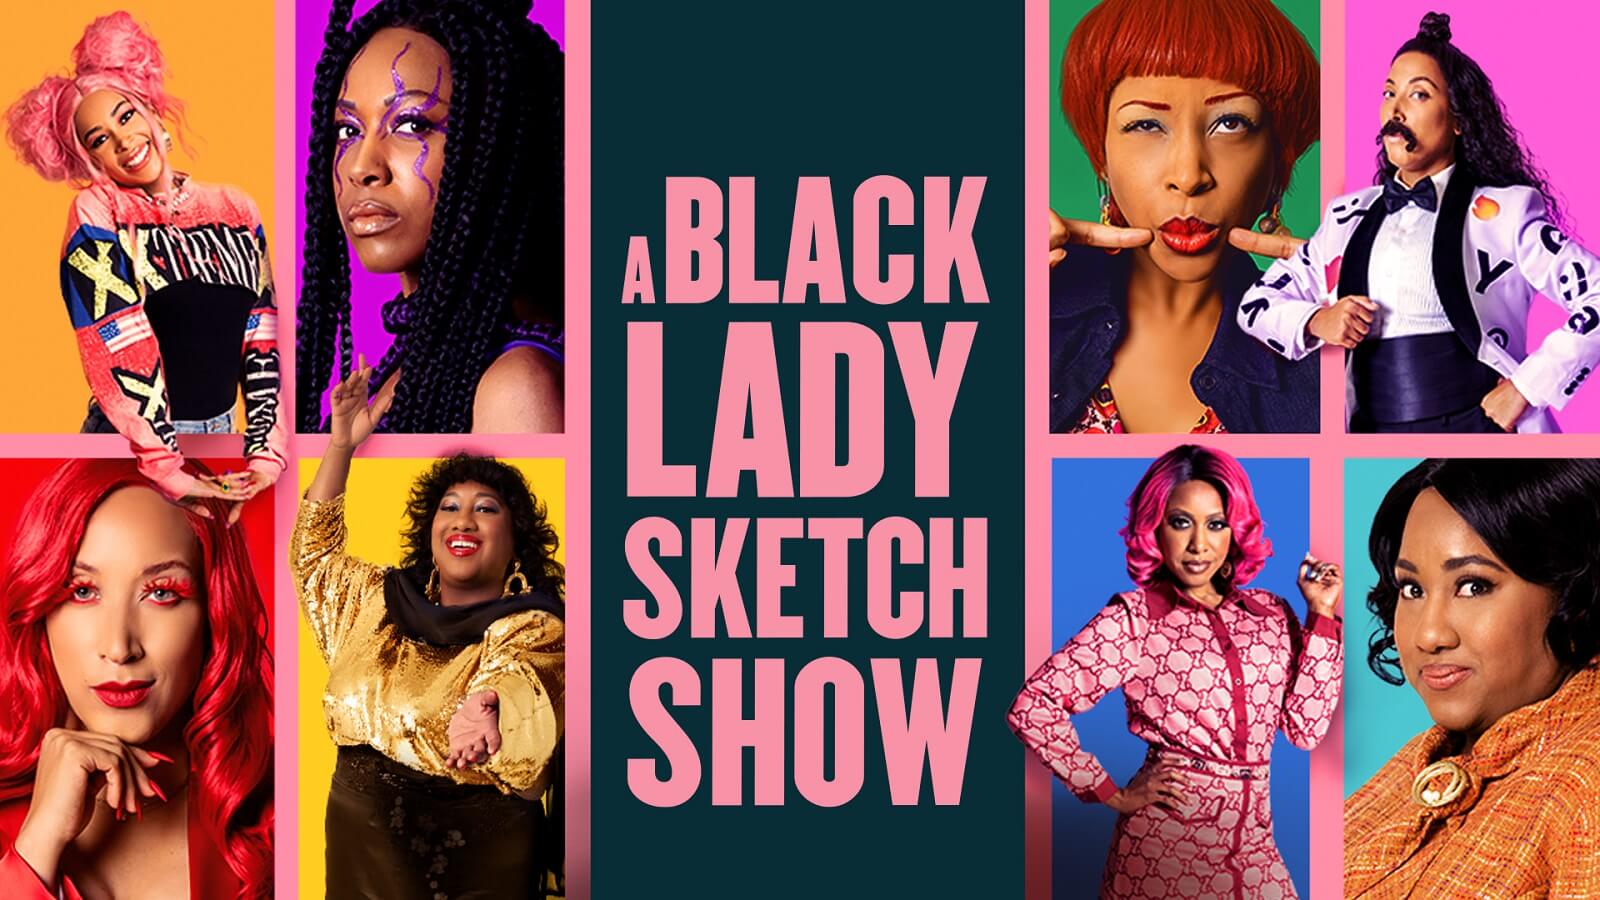 Watch A Black Lady Sketch Show Online  Now Streaming on OSN Chad